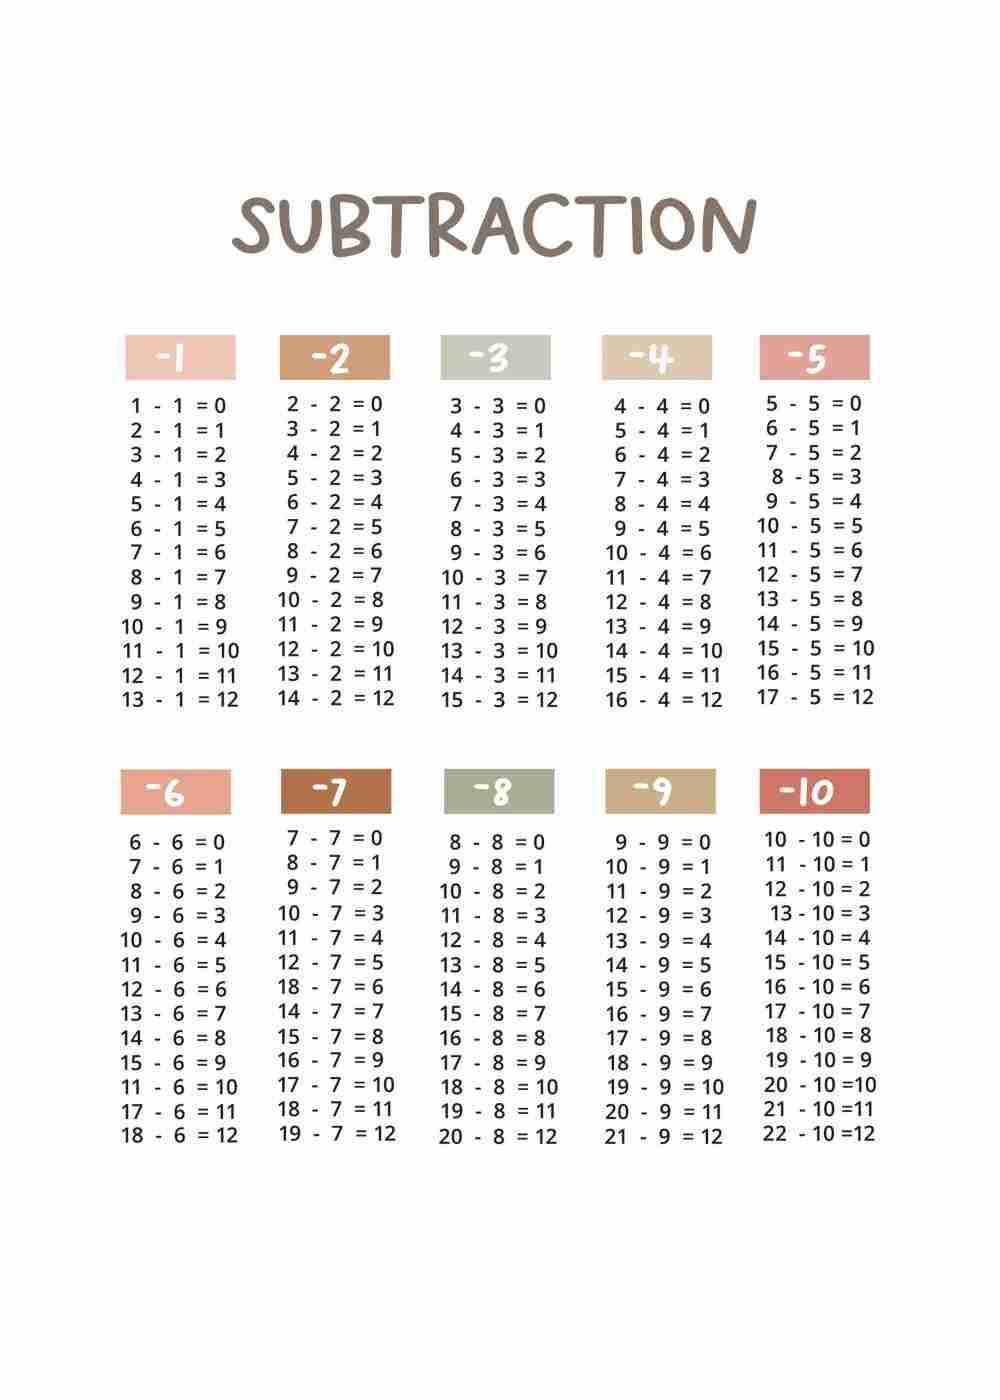 Subtraction Poster Count